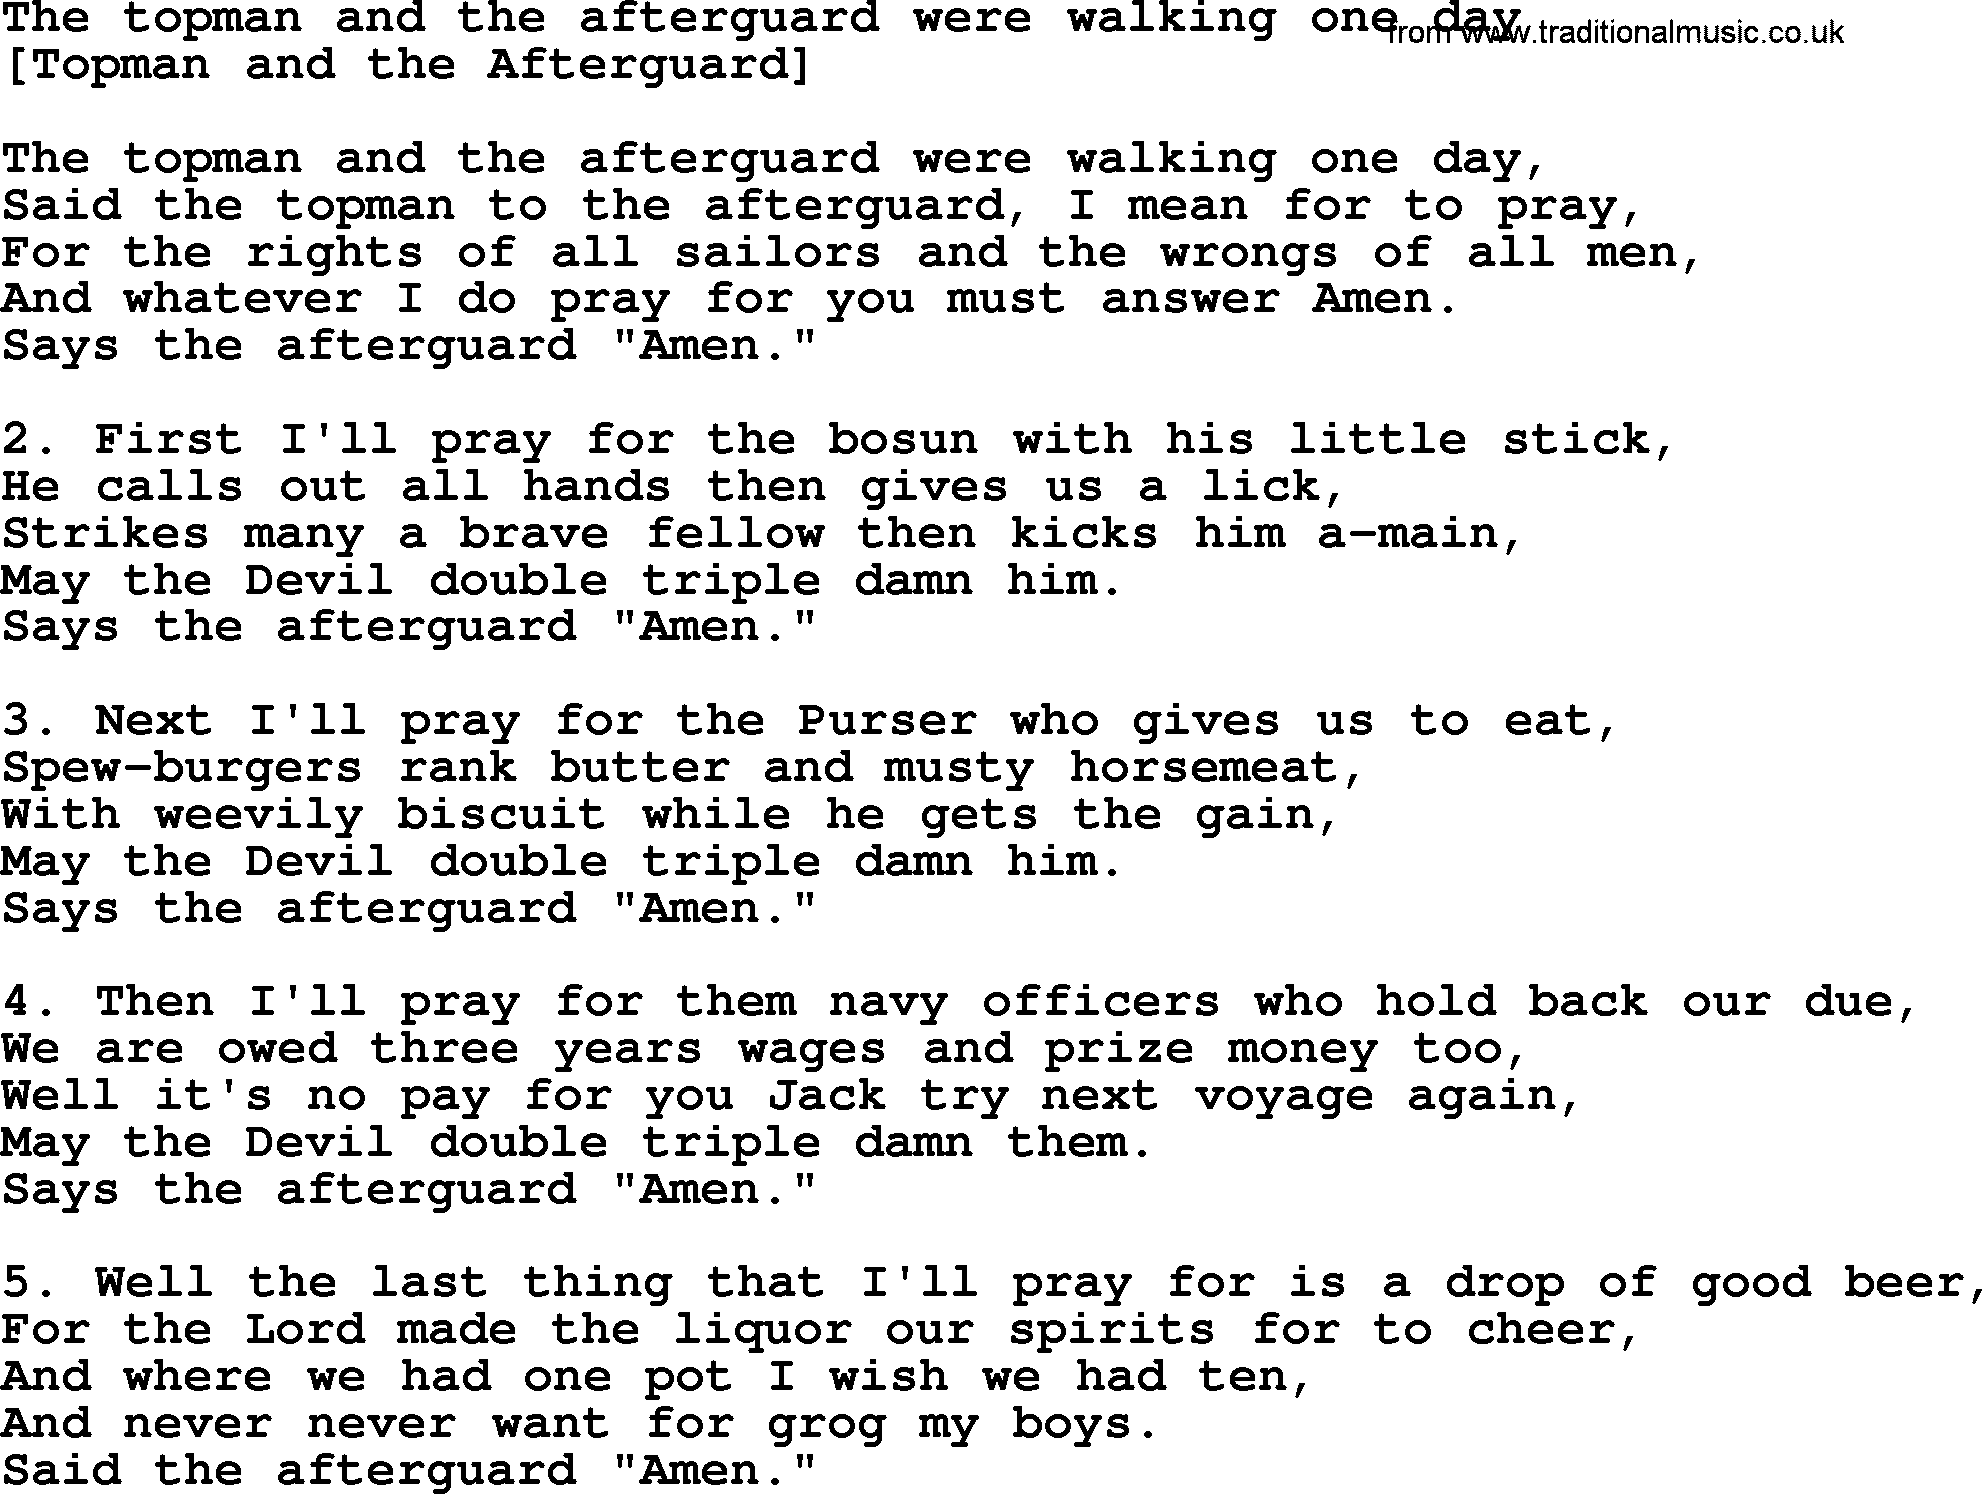 Old English Song: The Topman And The Afterguard Were Walking One Day lyrics